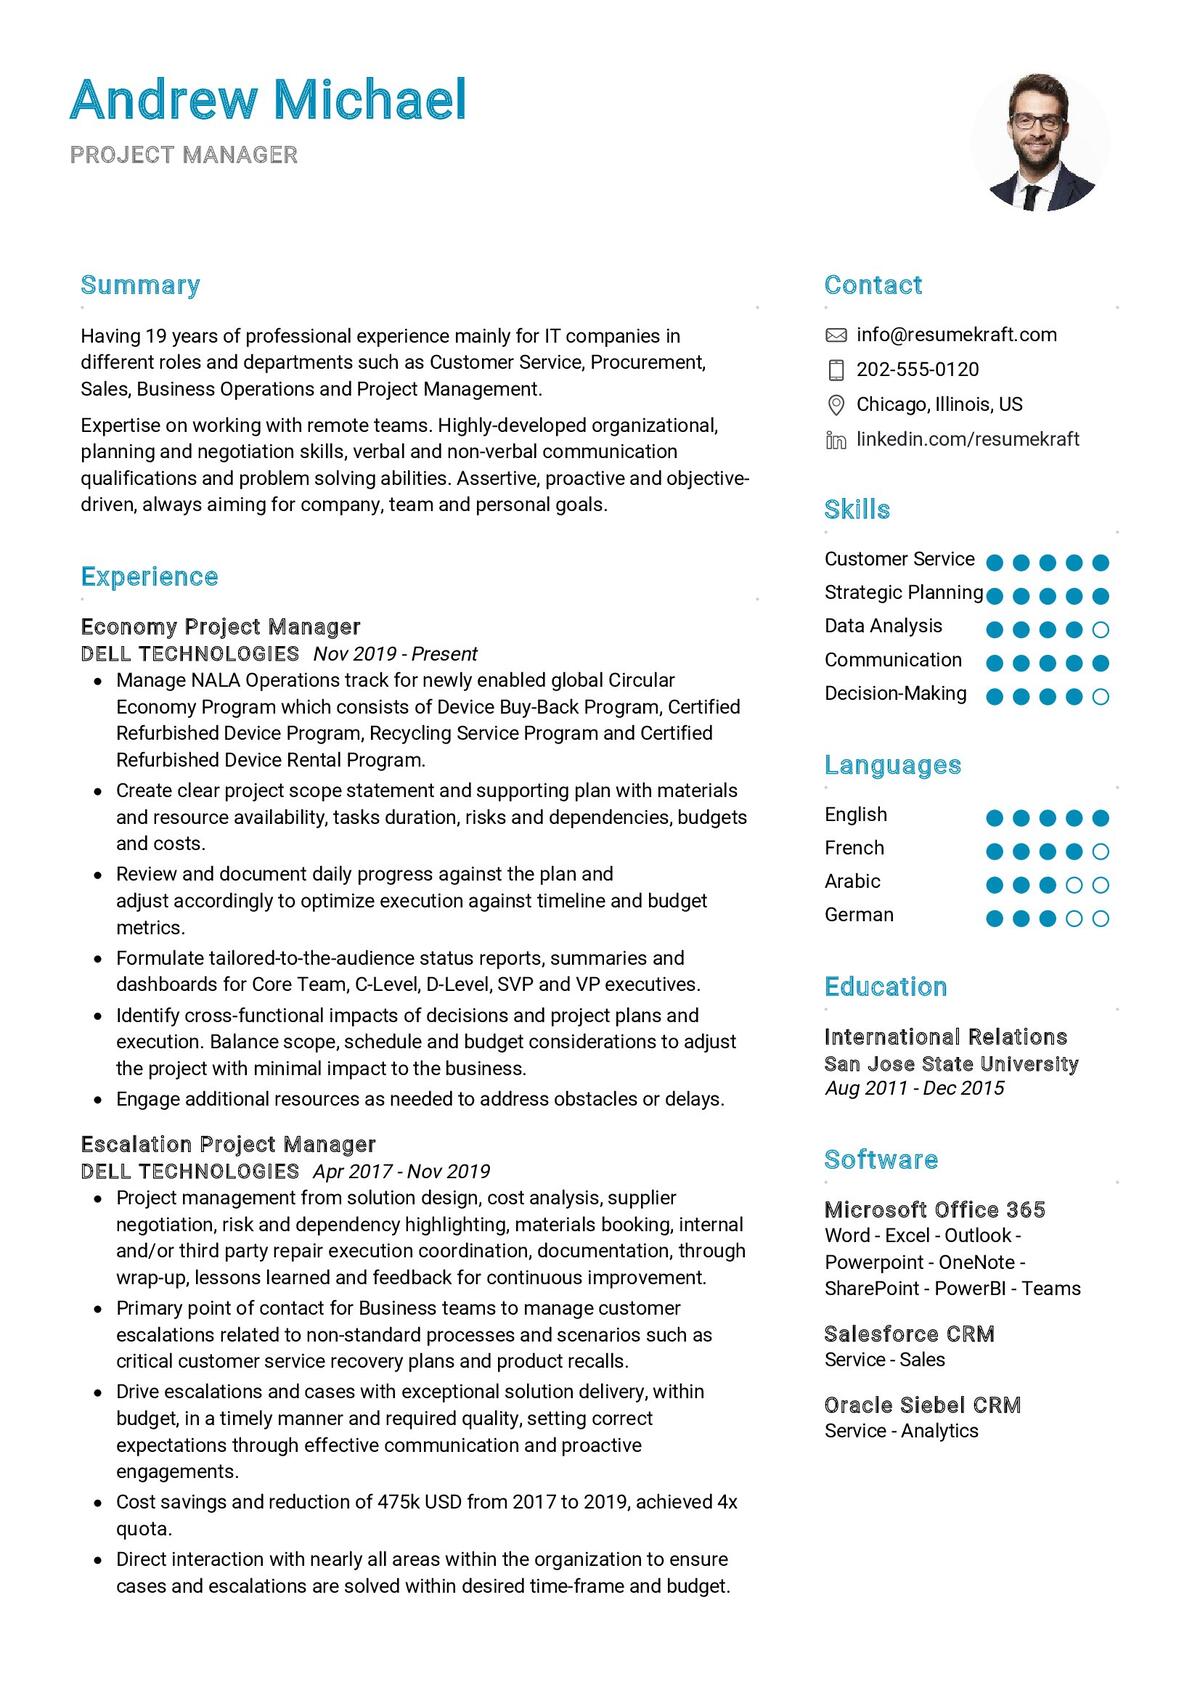 resume for project manager layout